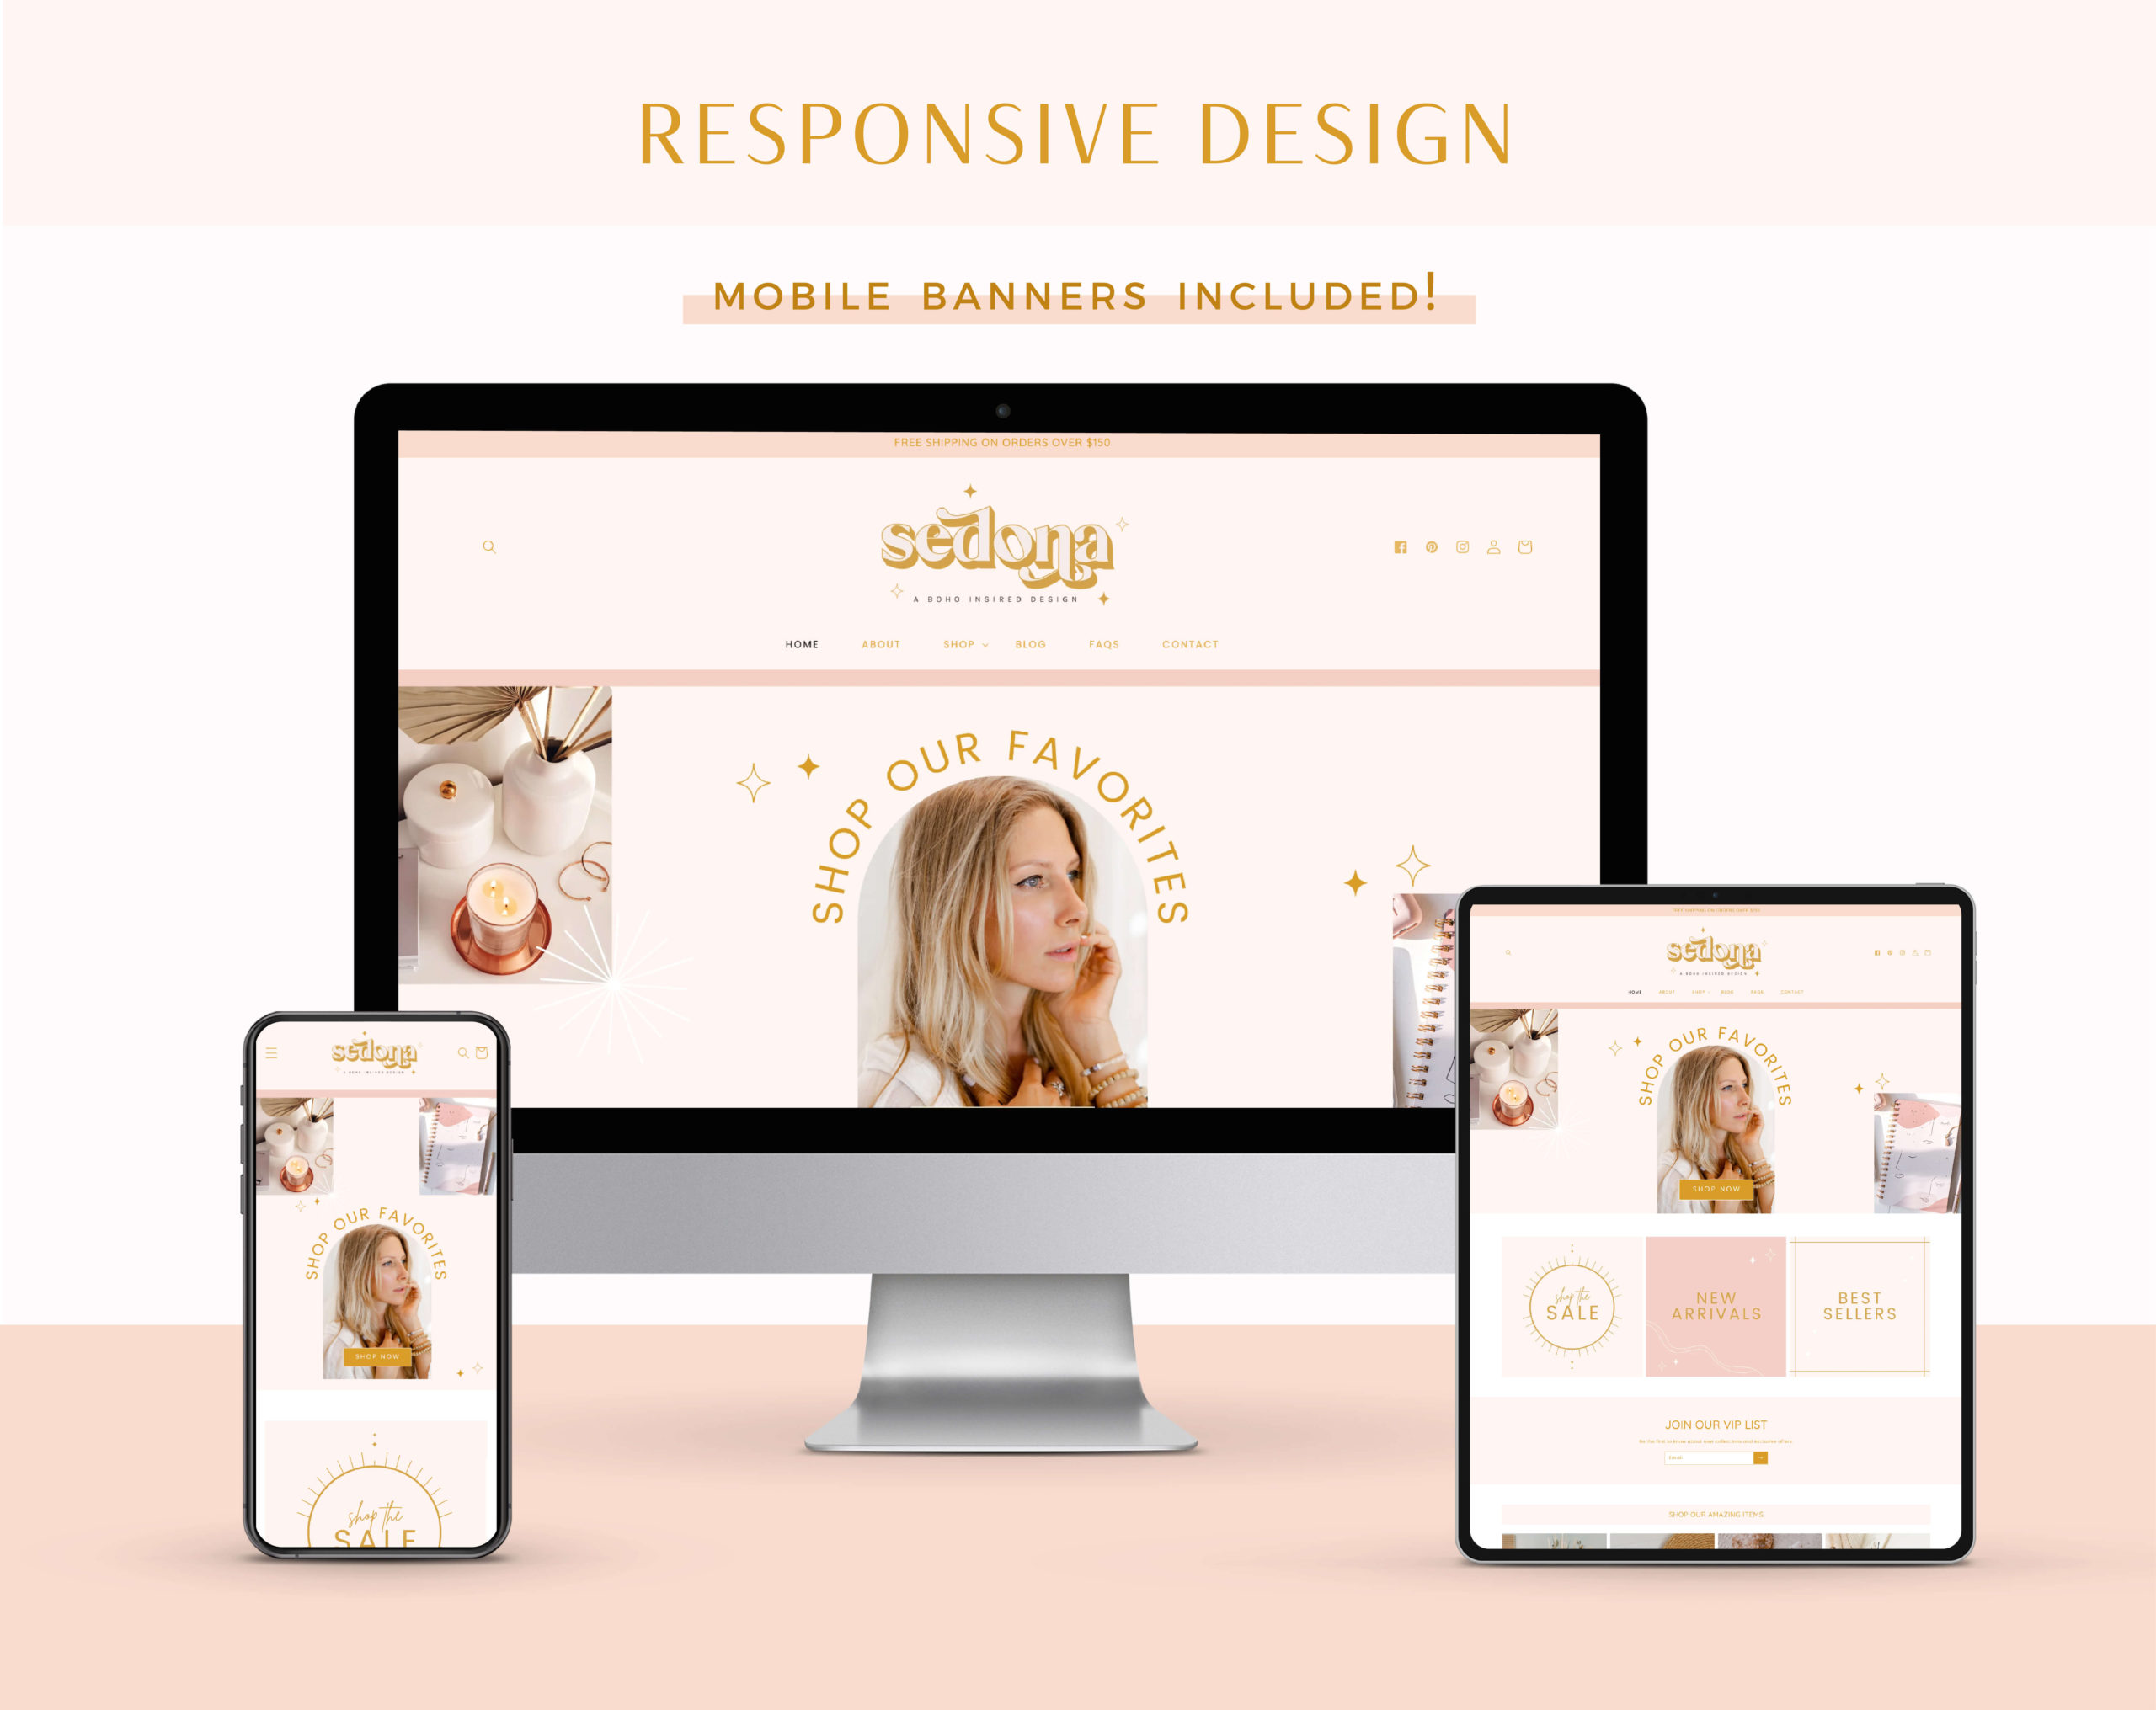 Boho Shopify theme with store banners to edit in Canva. A beautiful, bohemian ecommerce template for your Shopify website. Neutral Shopify Website Design